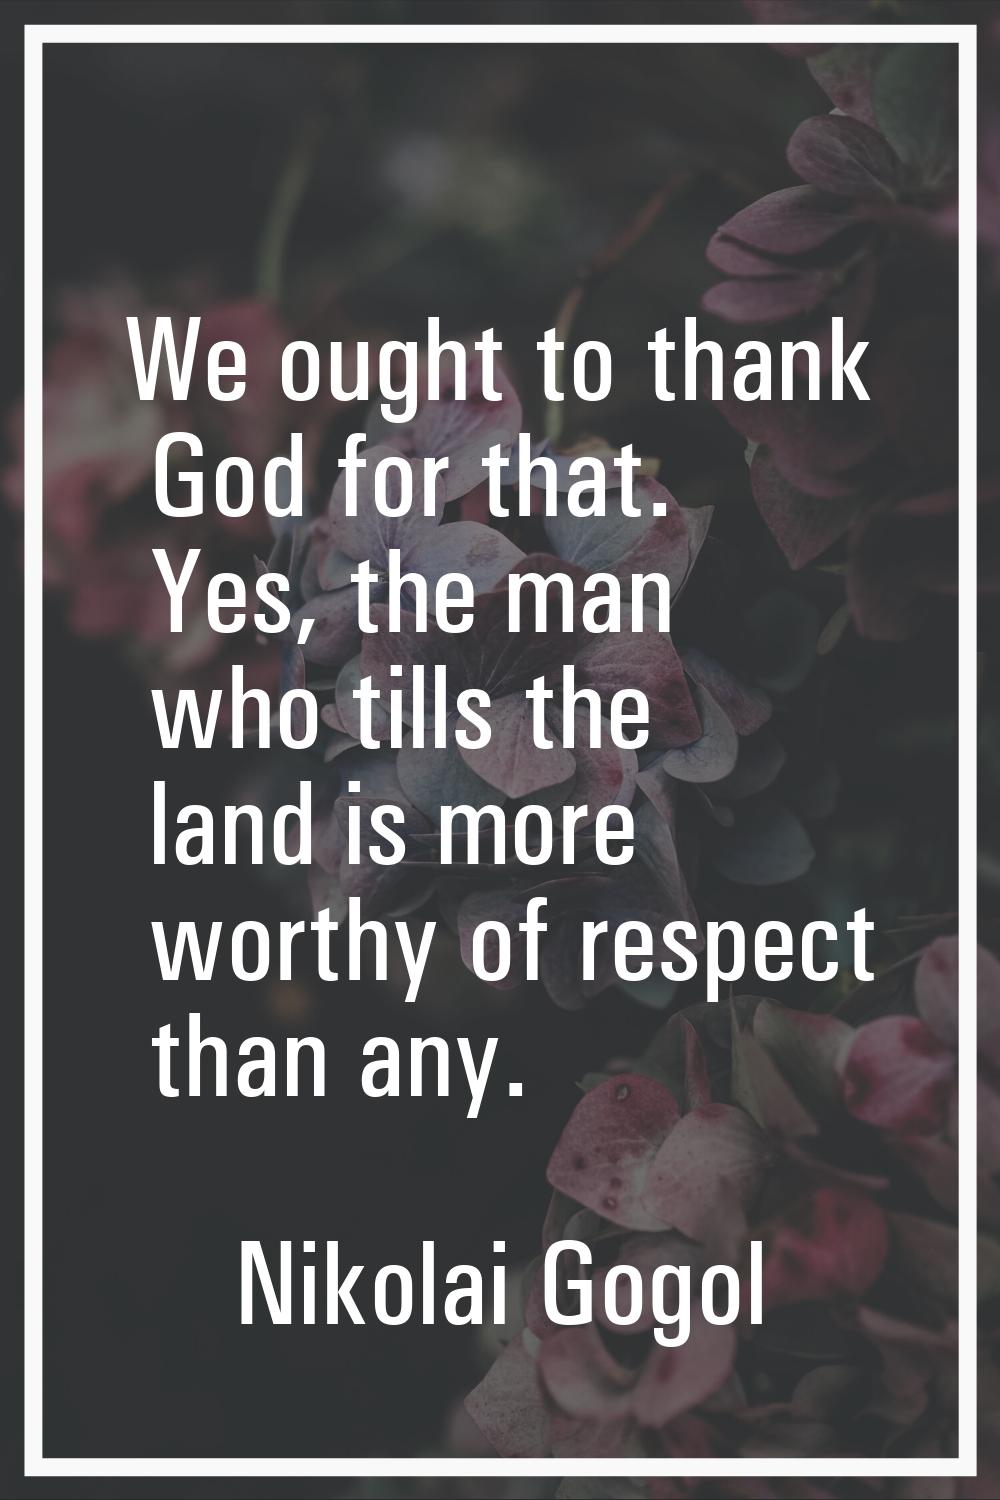 We ought to thank God for that. Yes, the man who tills the land is more worthy of respect than any.